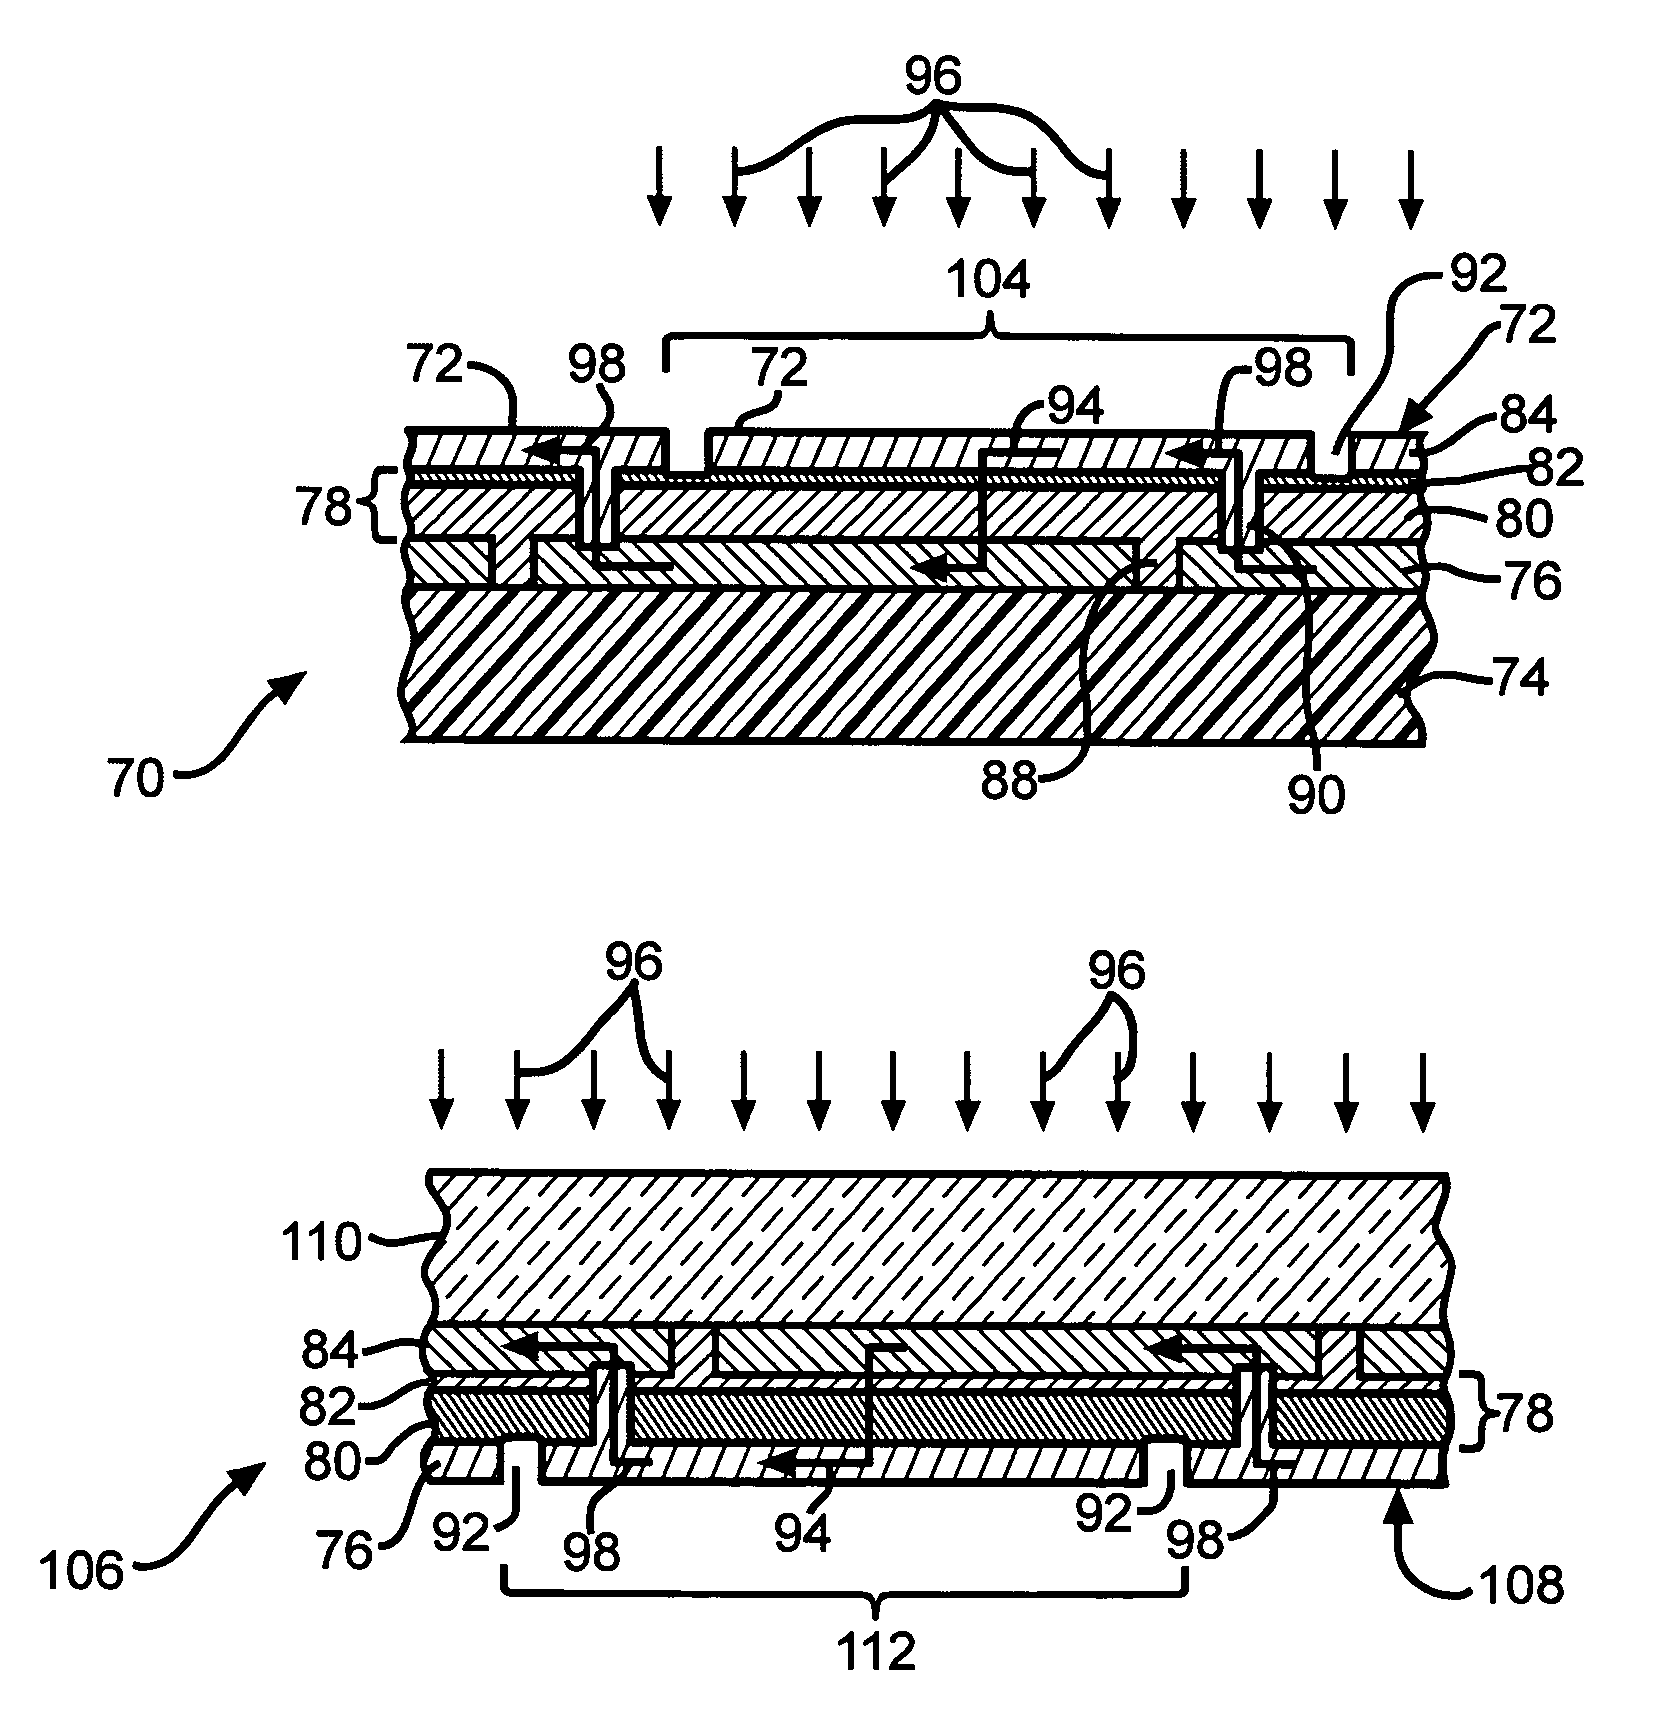 Method of making diode structures